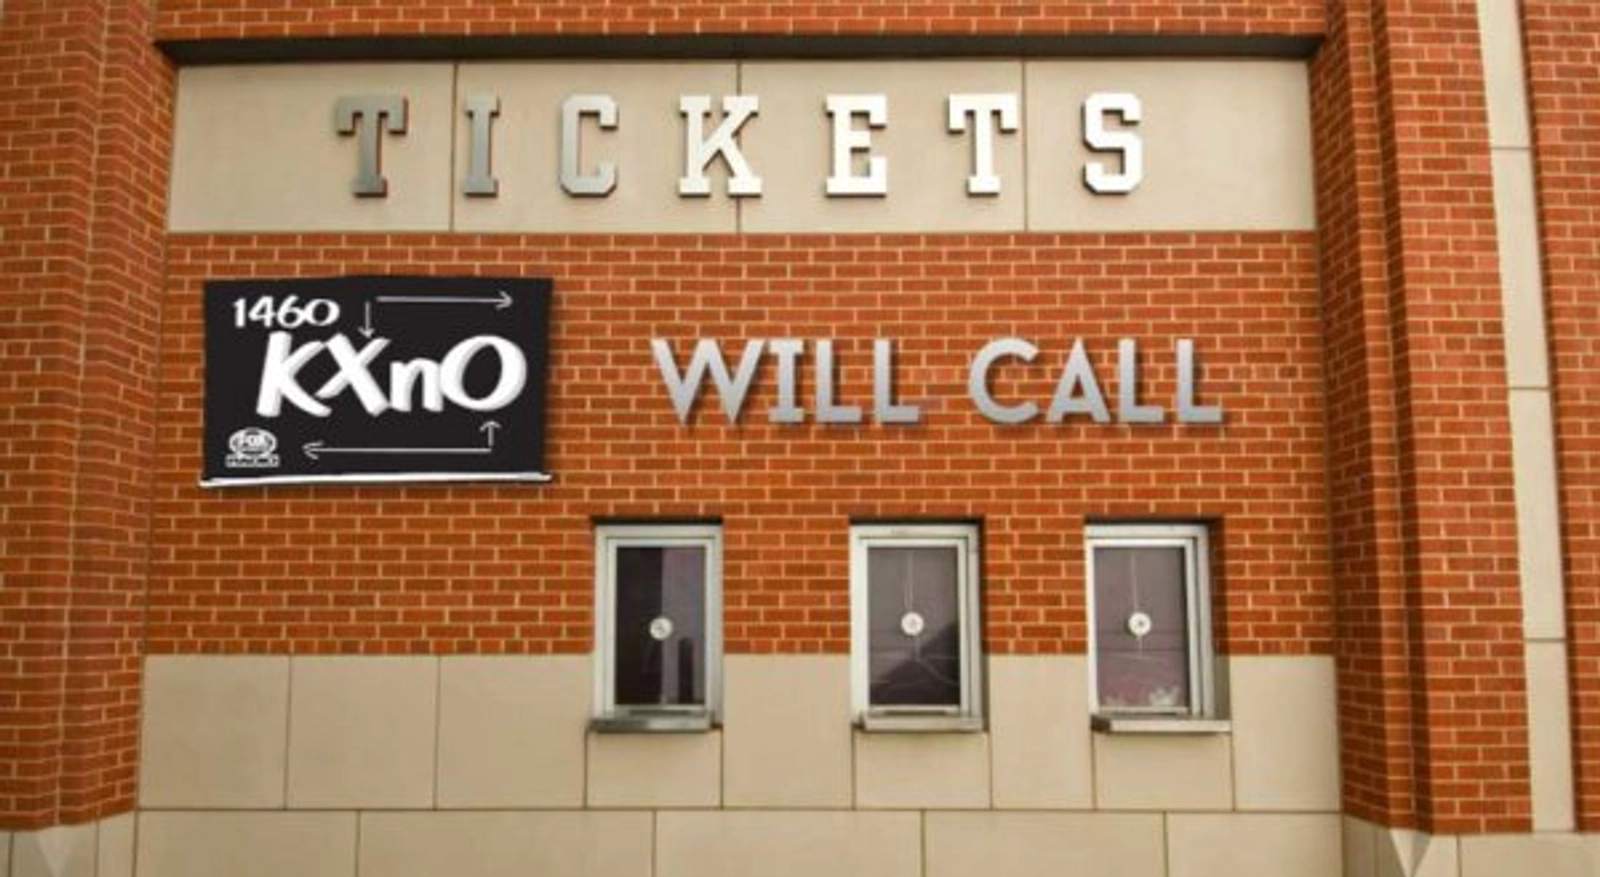  Win Tickets to Grand Funk Railroad from KXnO Will Call!  - Thumbnail Image